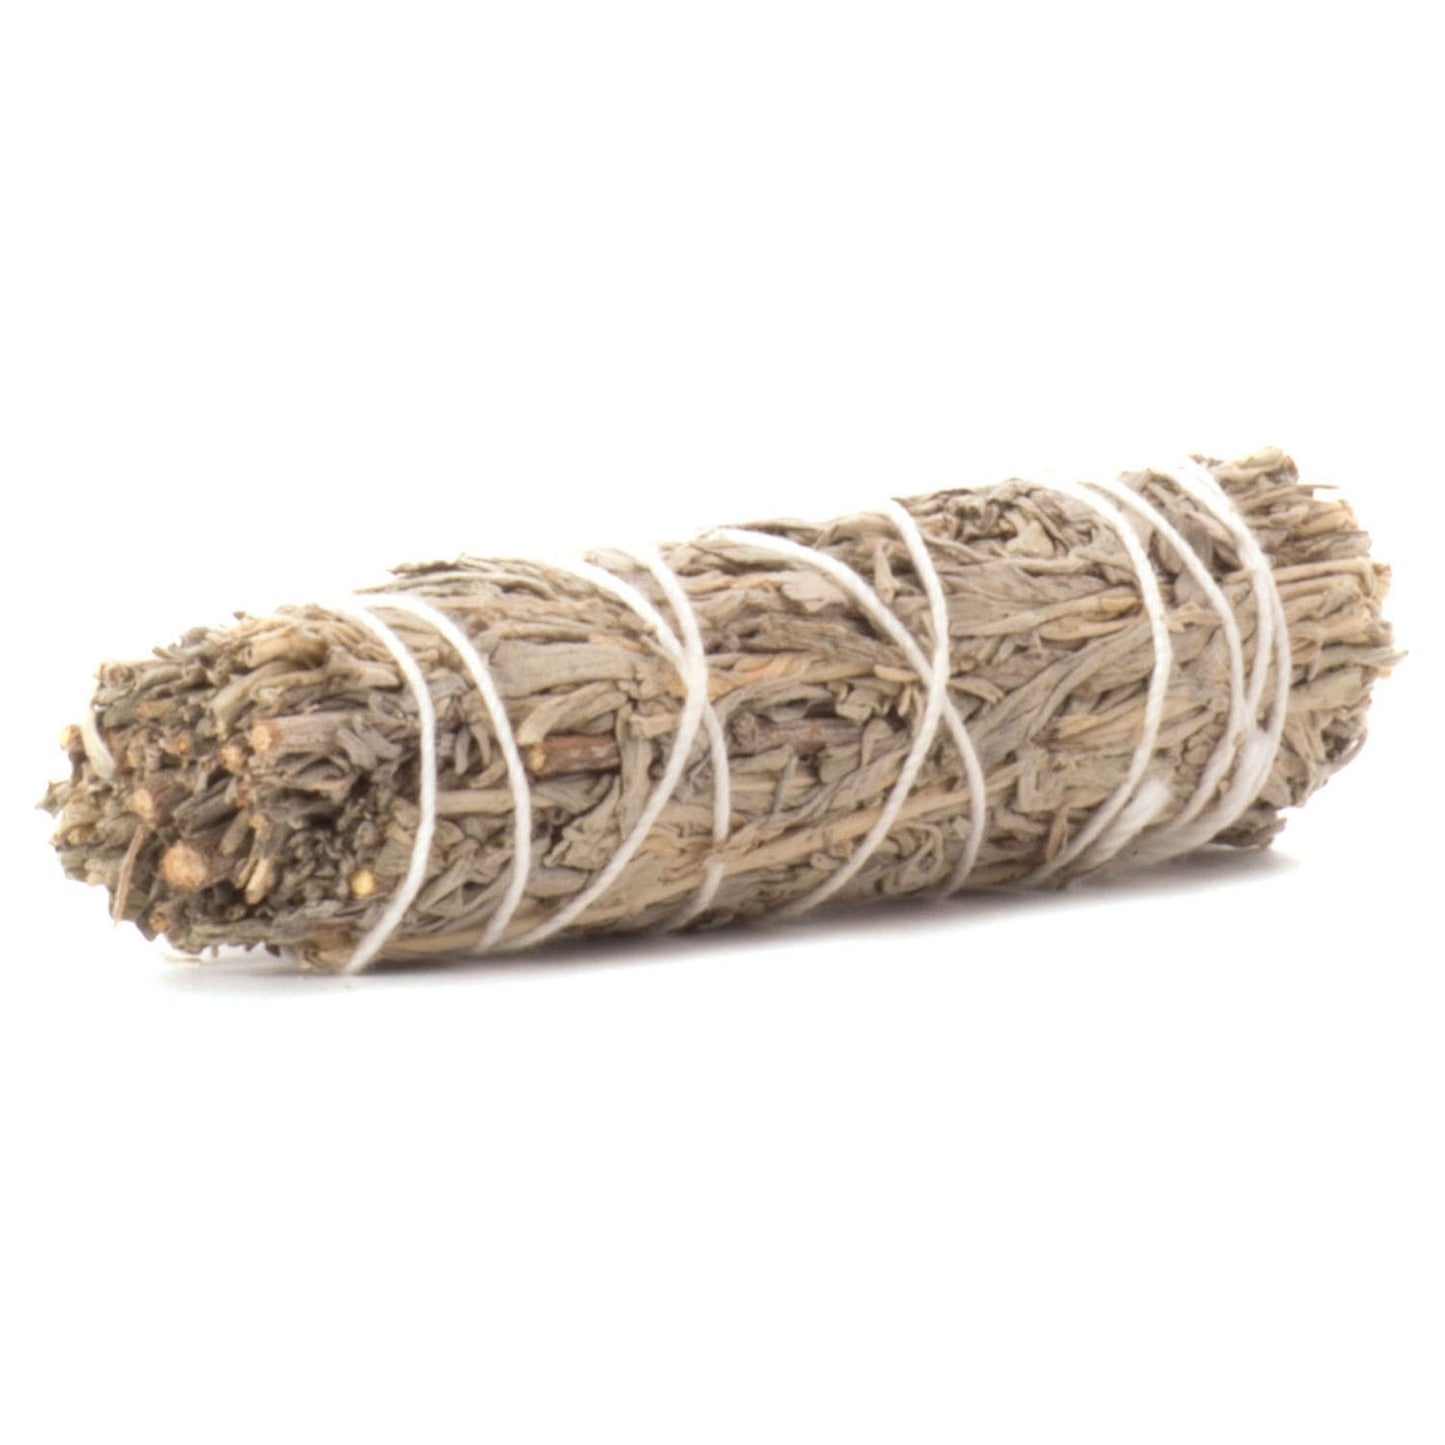 Smudge Sticks 10 cm - Variety Available - ShopGreenToday